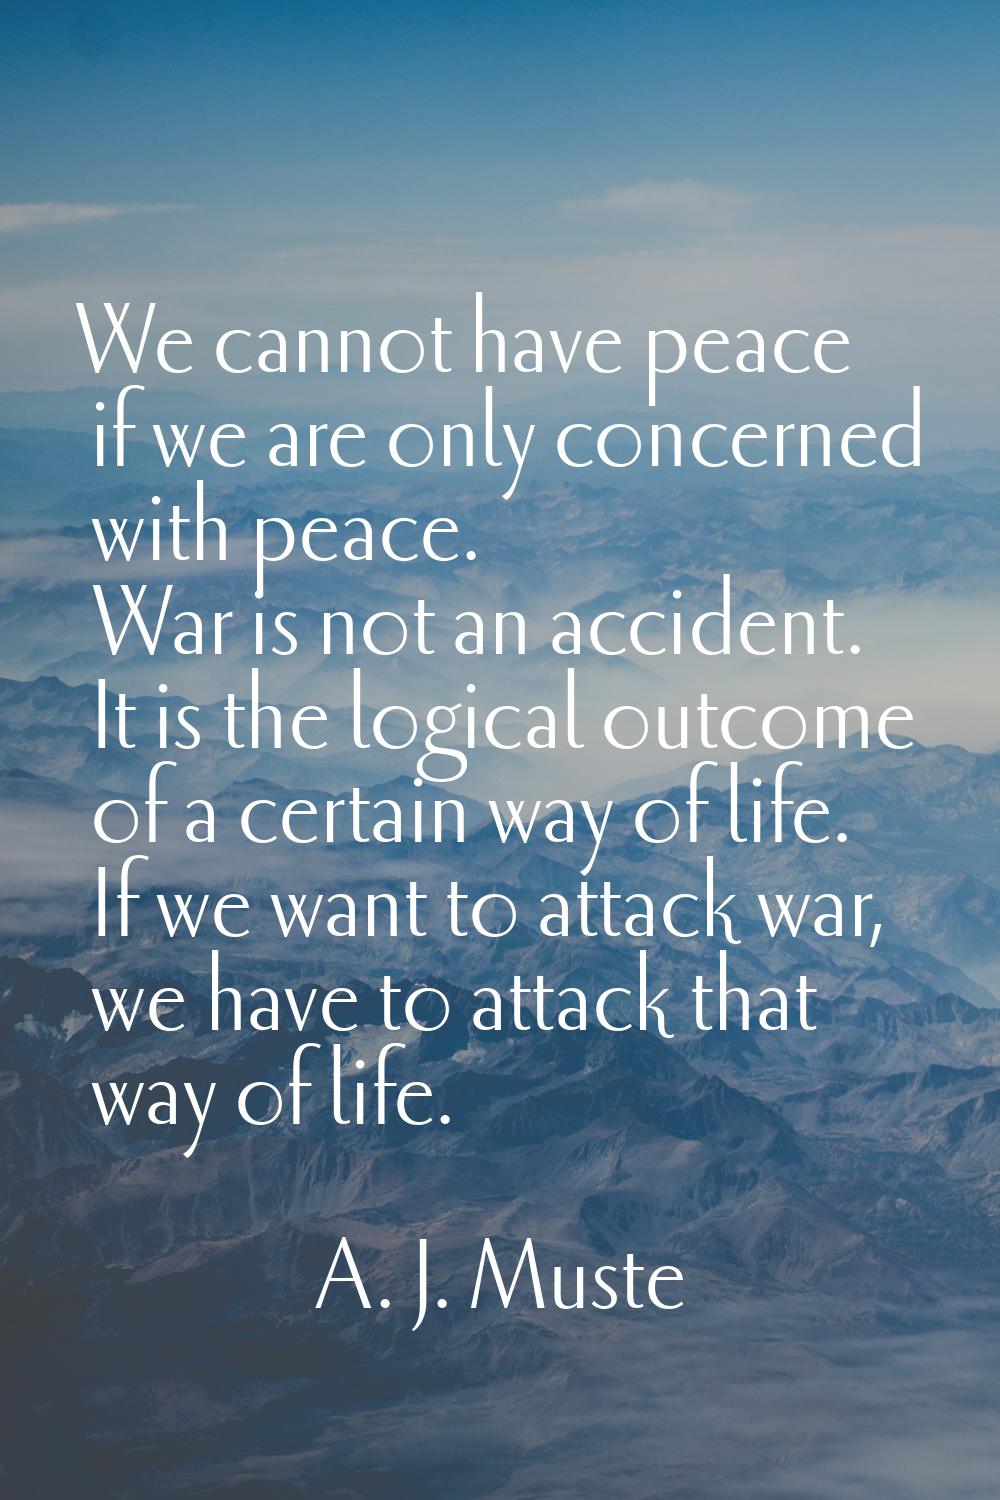 We cannot have peace if we are only concerned with peace. War is not an accident. It is the logical